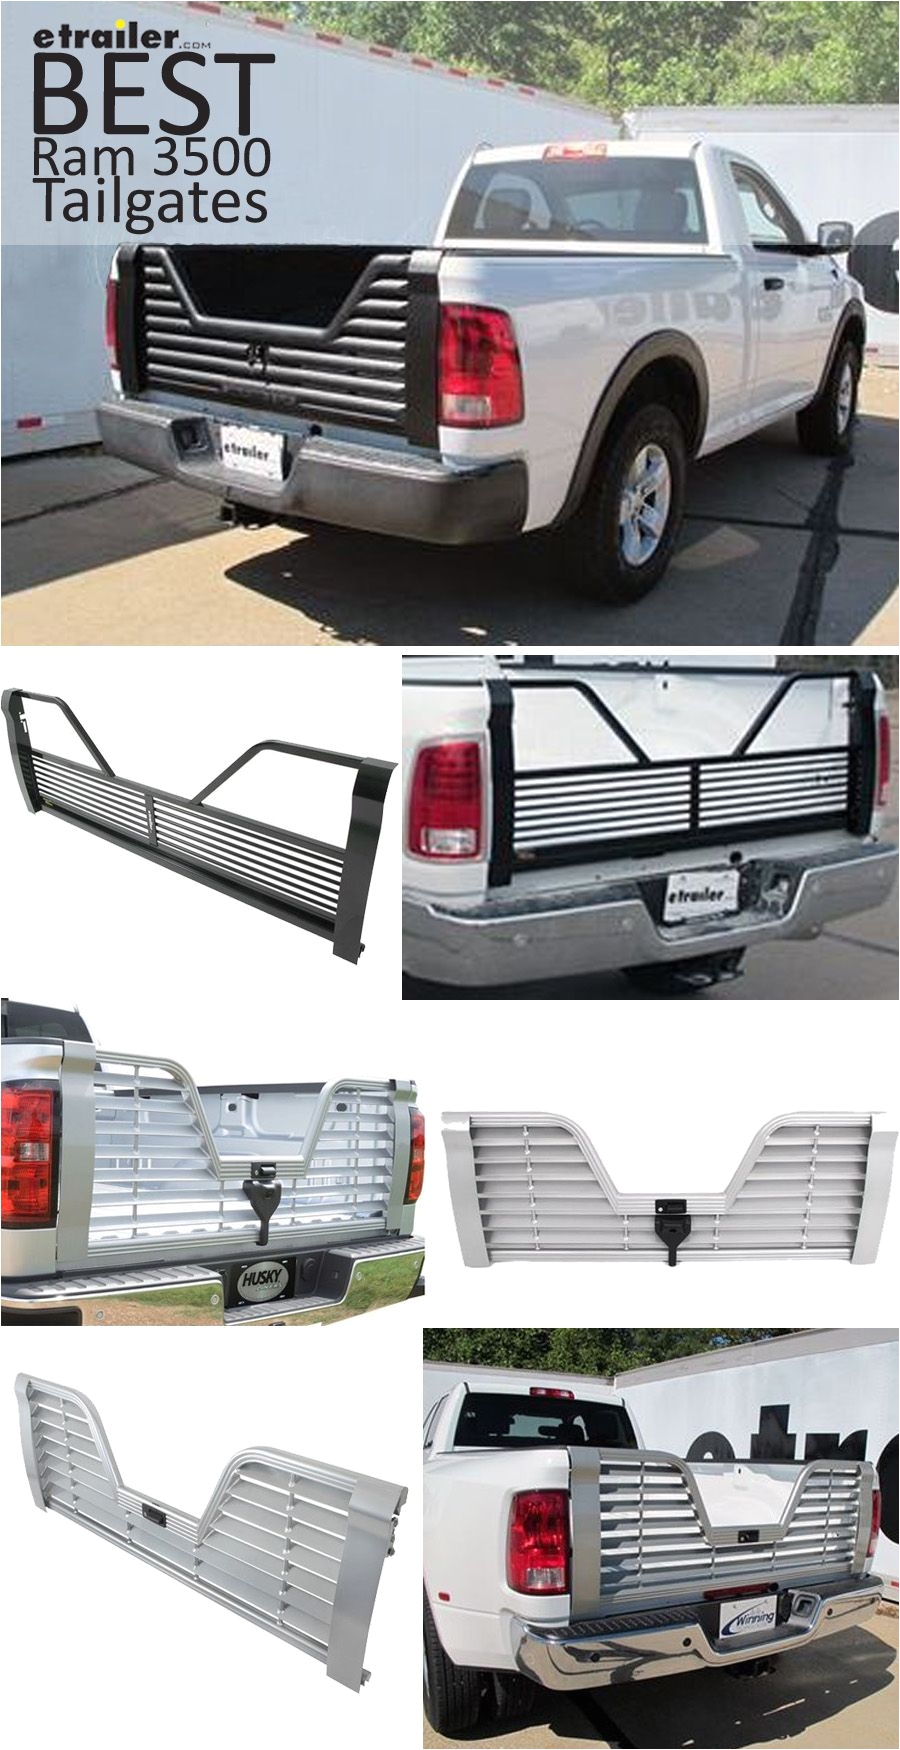 here are the best tailgates and tailgate accessories for your dodge ram 3500 truck 5th wheel tailgate with locking handle tailgate assist lowering system